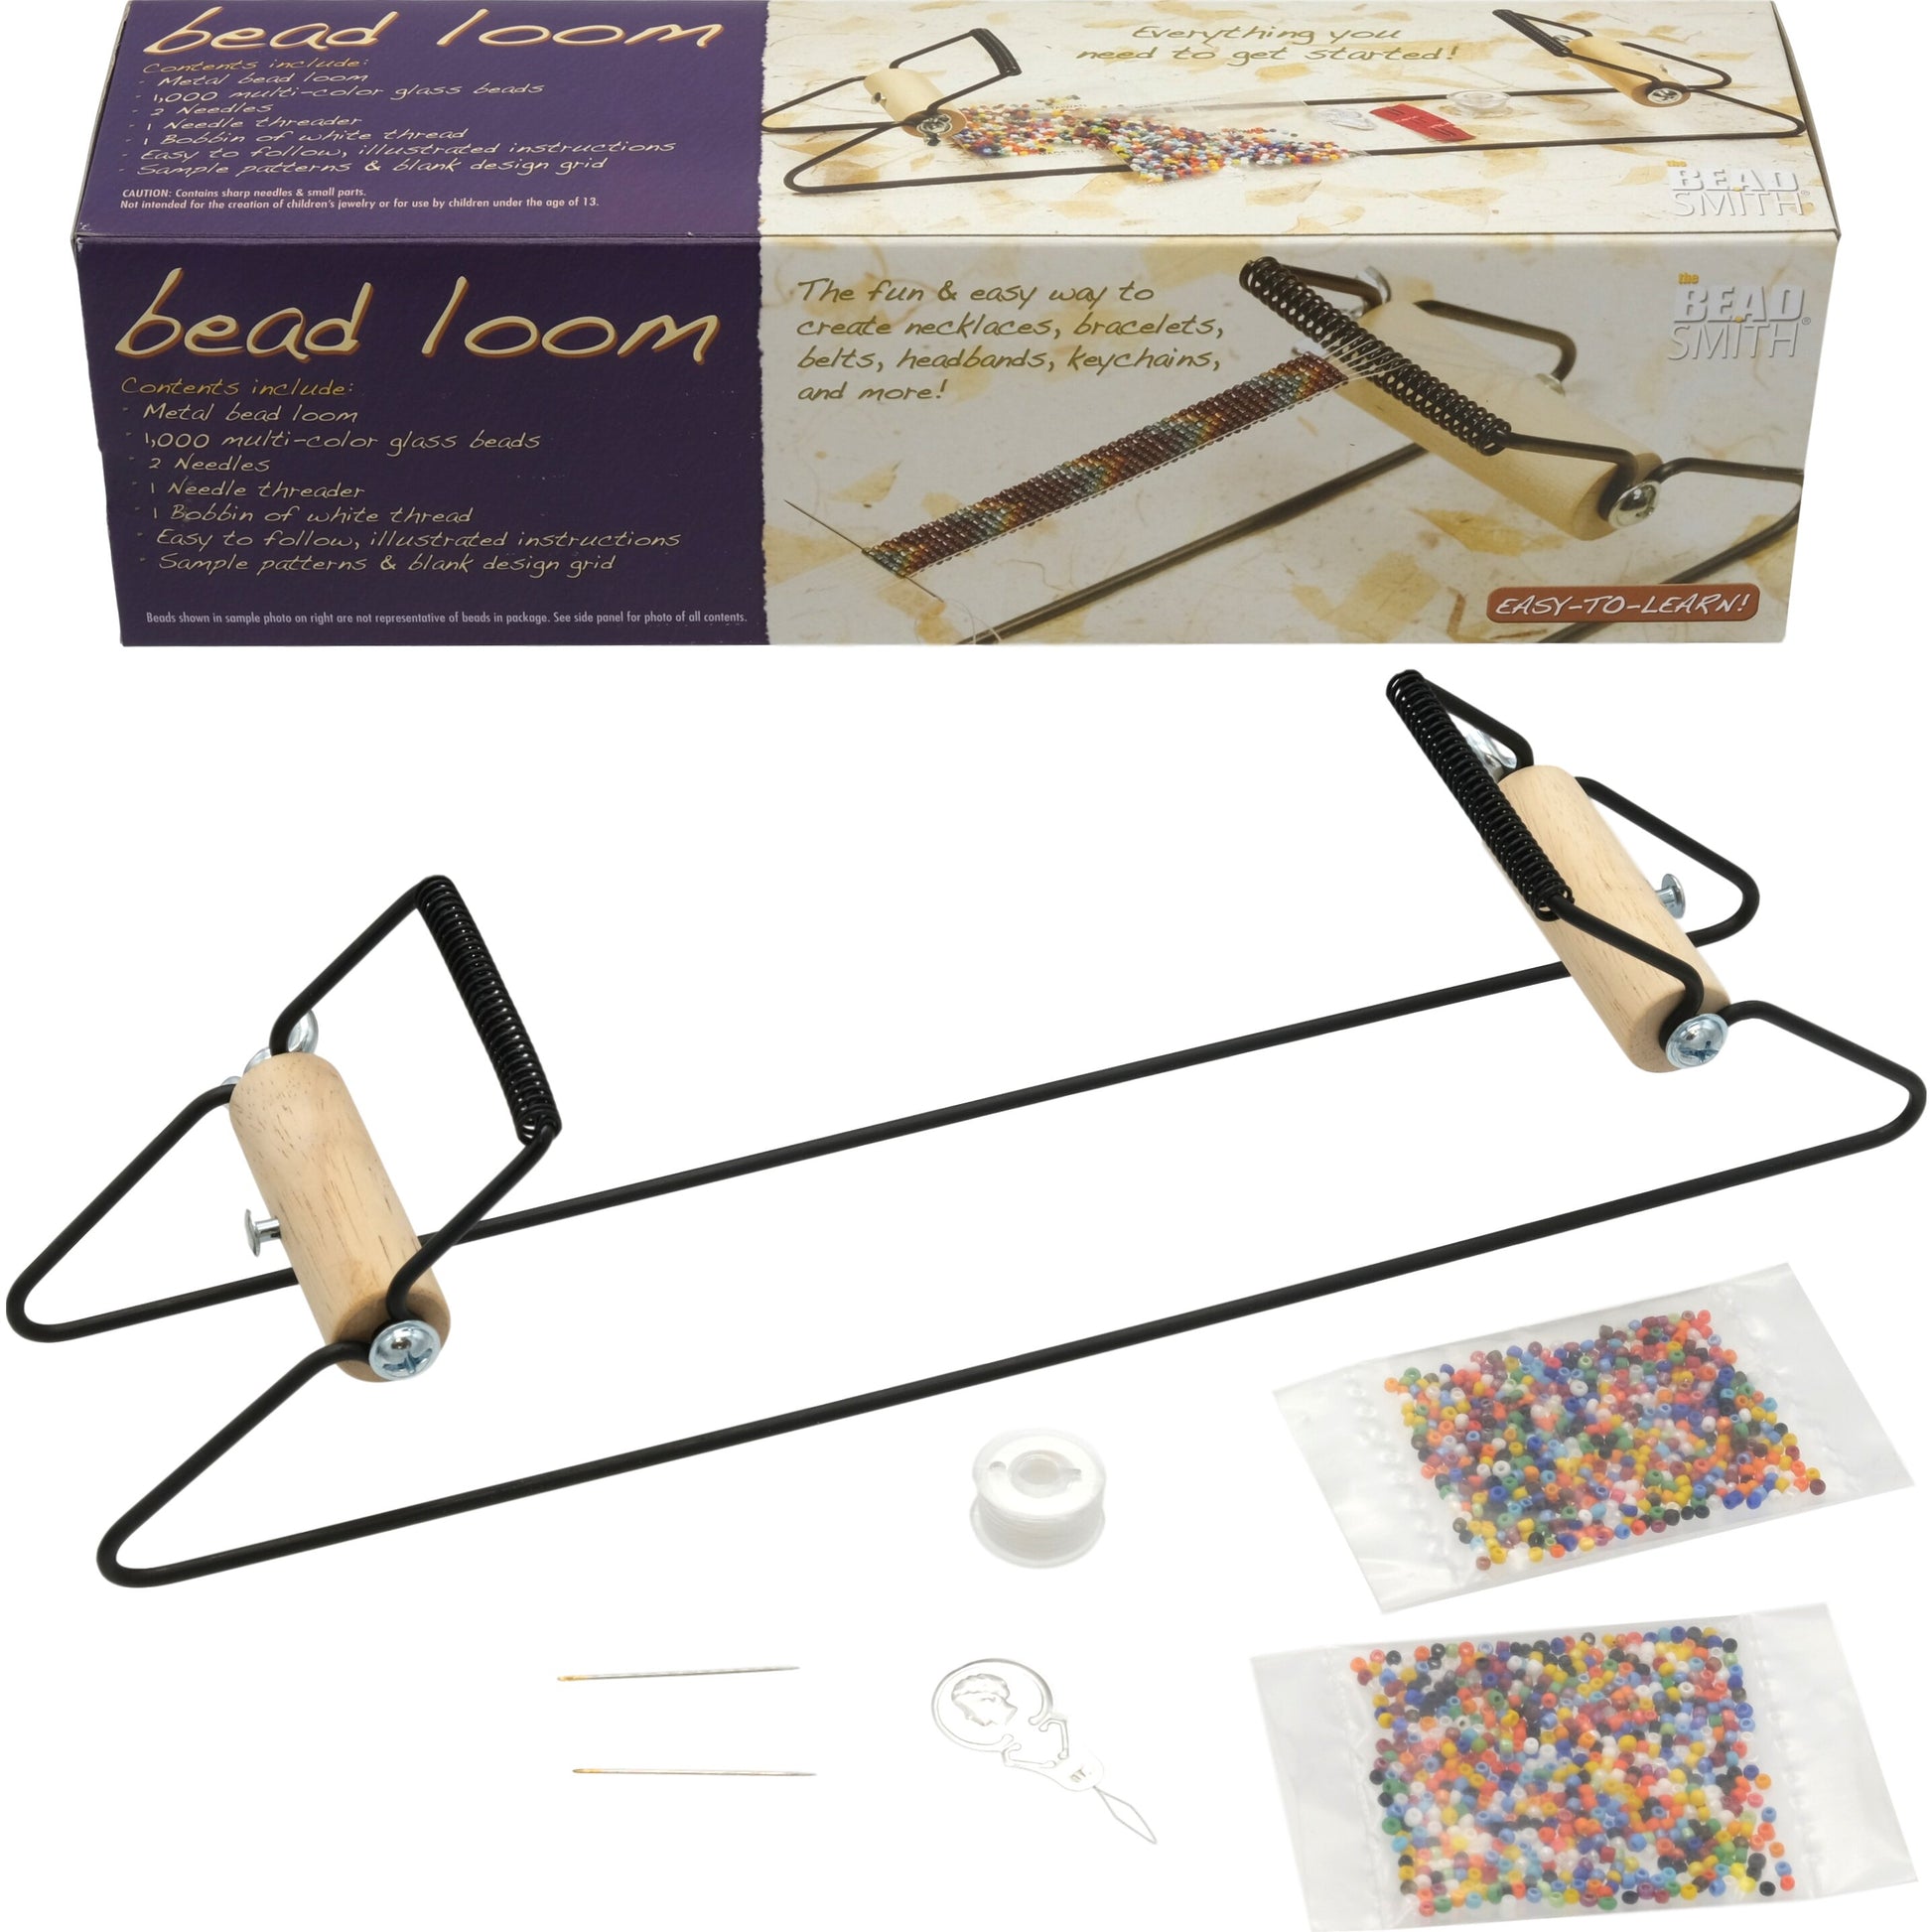 Beadsmith Bead Loom Kit for Beginners Includes Weave Necklaces Bracelets and